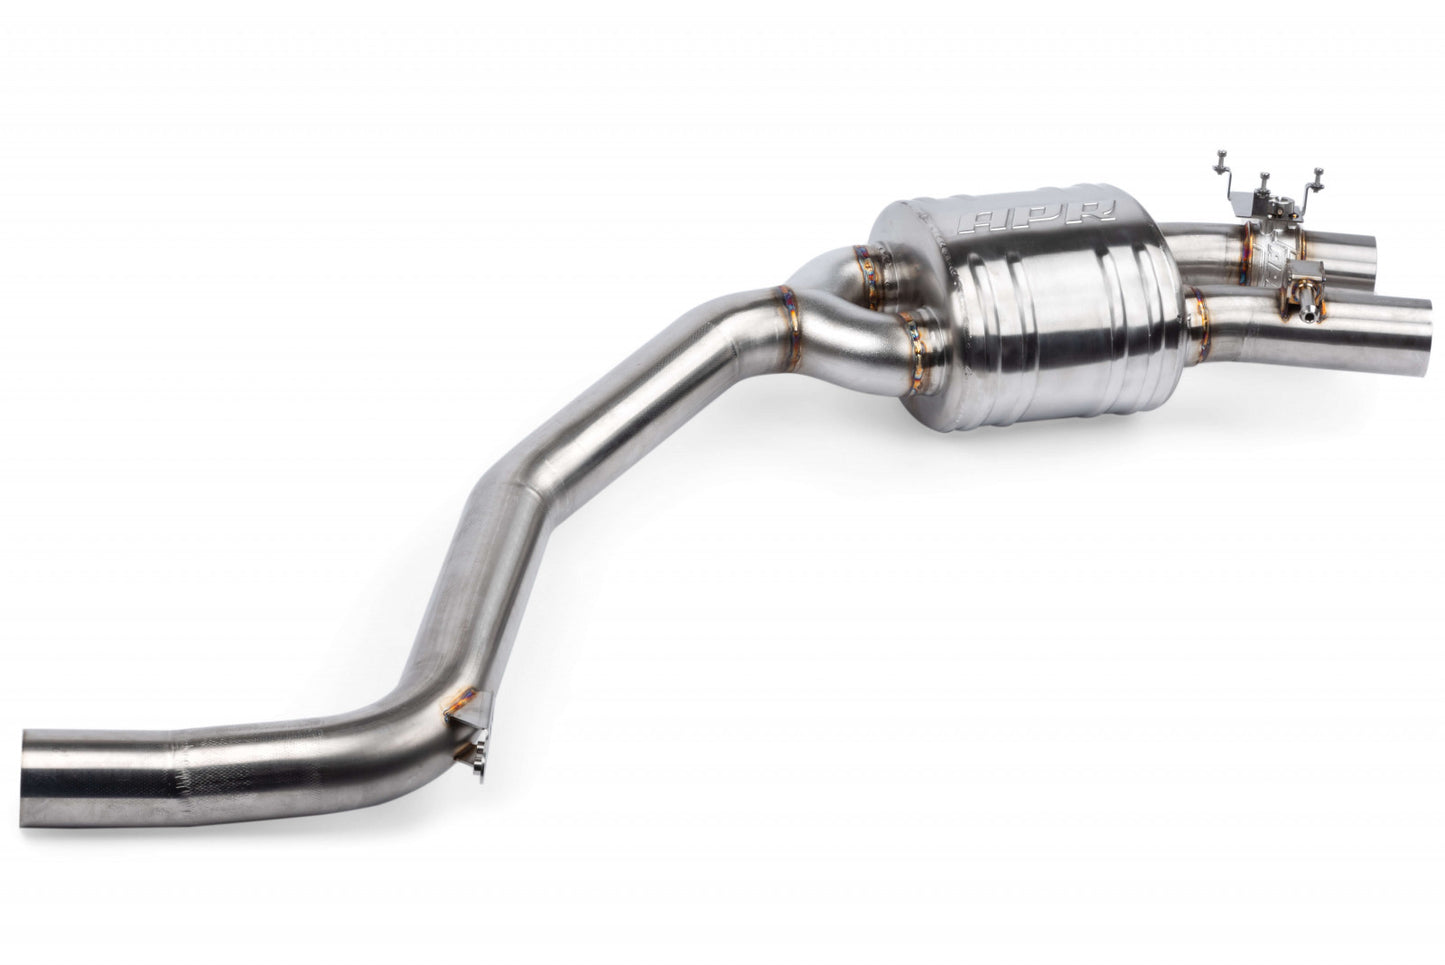 APR Catback Exhaust System - 4.0 TFSI - C7 S6 and S7 CBK0009